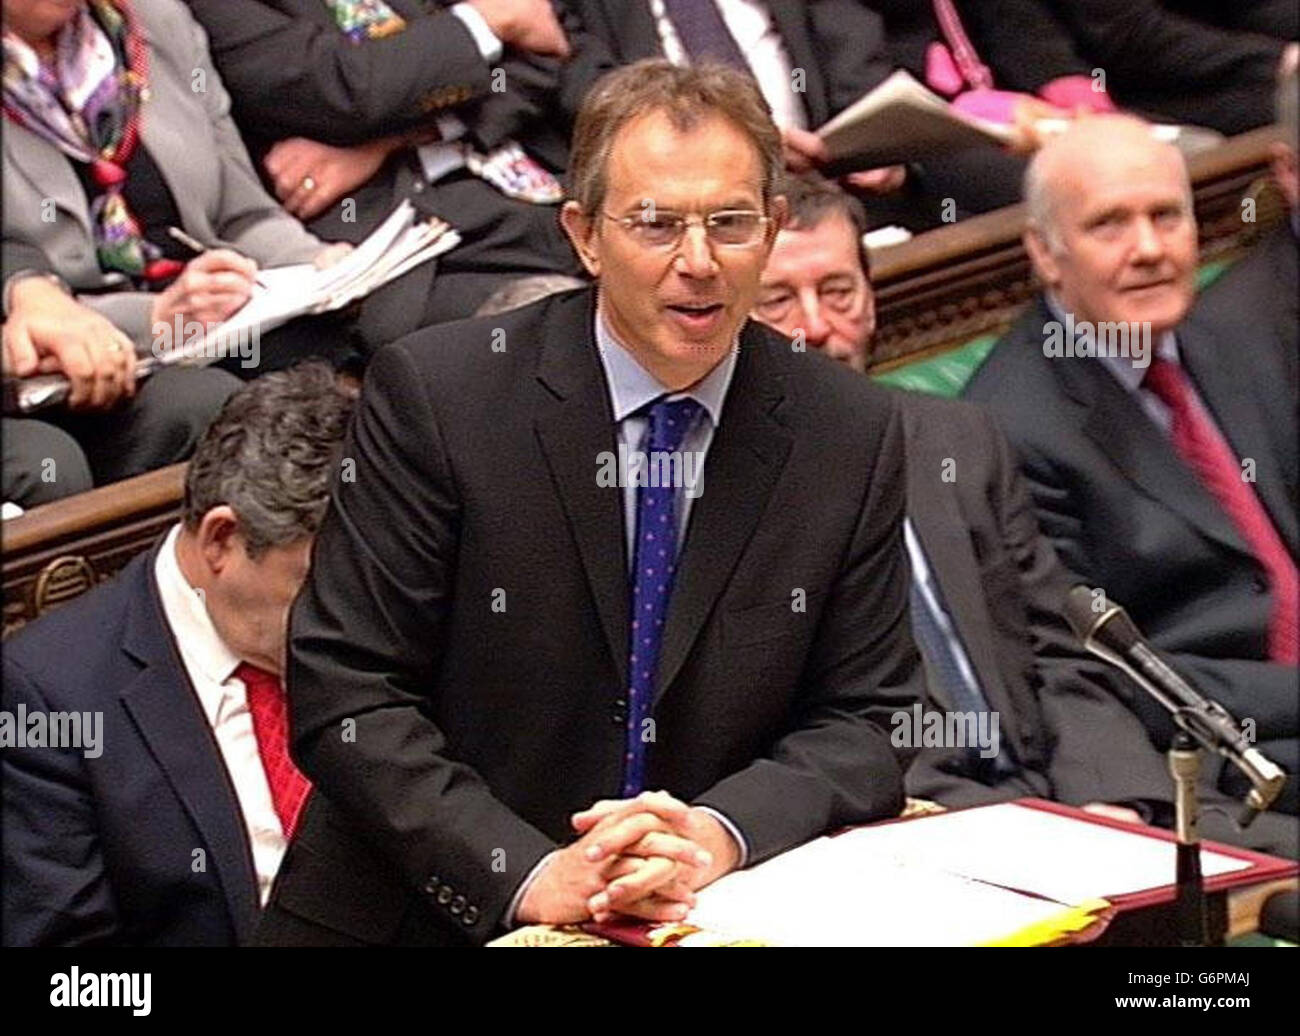 Prime Minister Tony Blair during his regular weekly Question Time in the House of Commons, London. Mr Blair took questions from MP's ahead of the formal publication of the Hutton report into the circumstances surrounding the death of Government weapons expert Dr David Kelly. Stock Photo